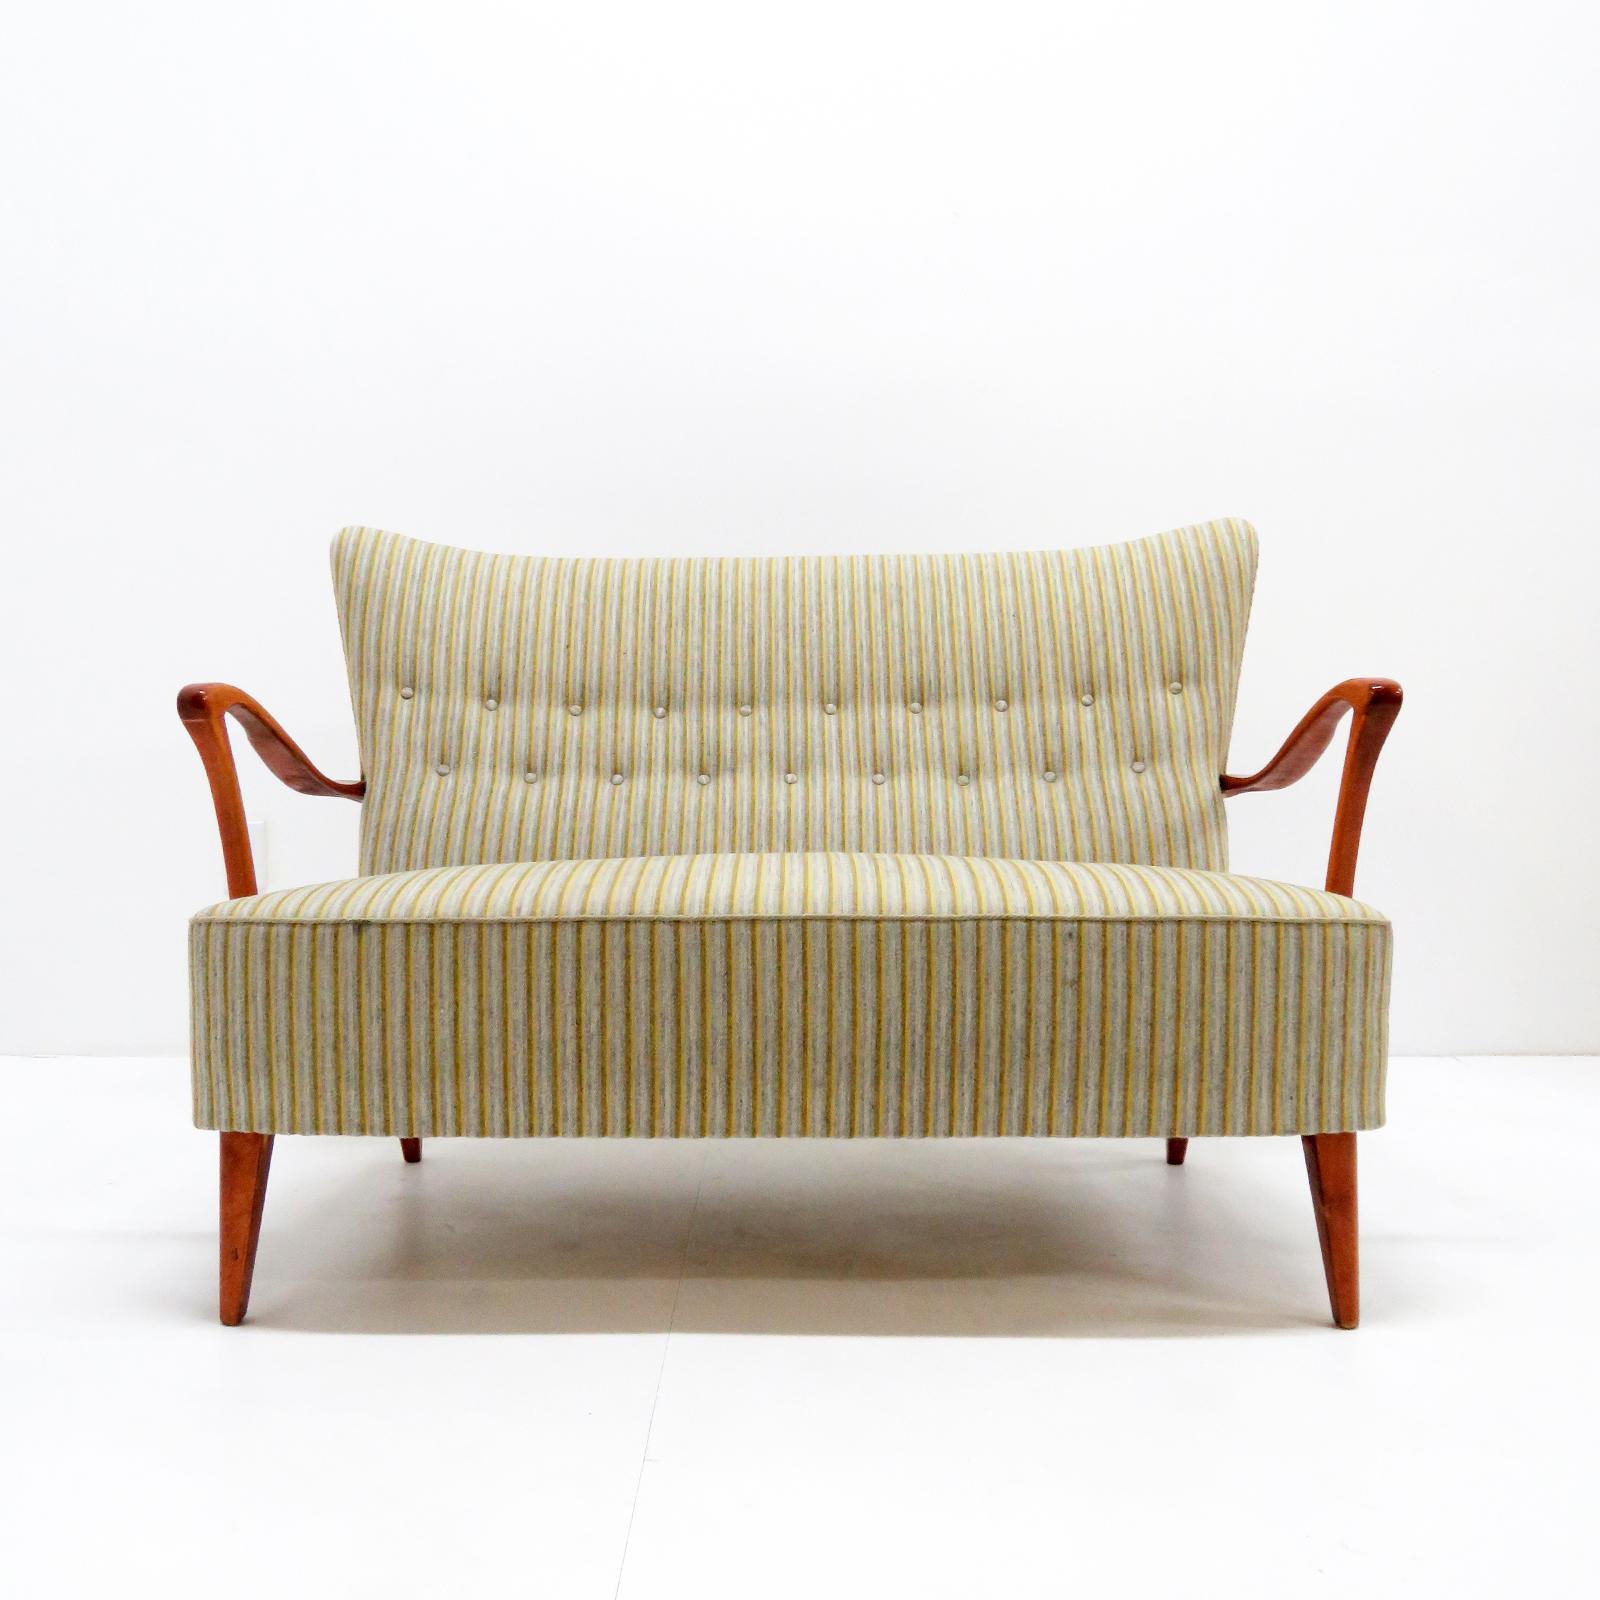 Wonderful Danish modern sofa, settee by DUX, sculptural stained and lacquered beech frame with a multicolored, striped upholstered body, The concave wing-back is tufted and the seat is spring supported, marked. (see also LU848715416872 and